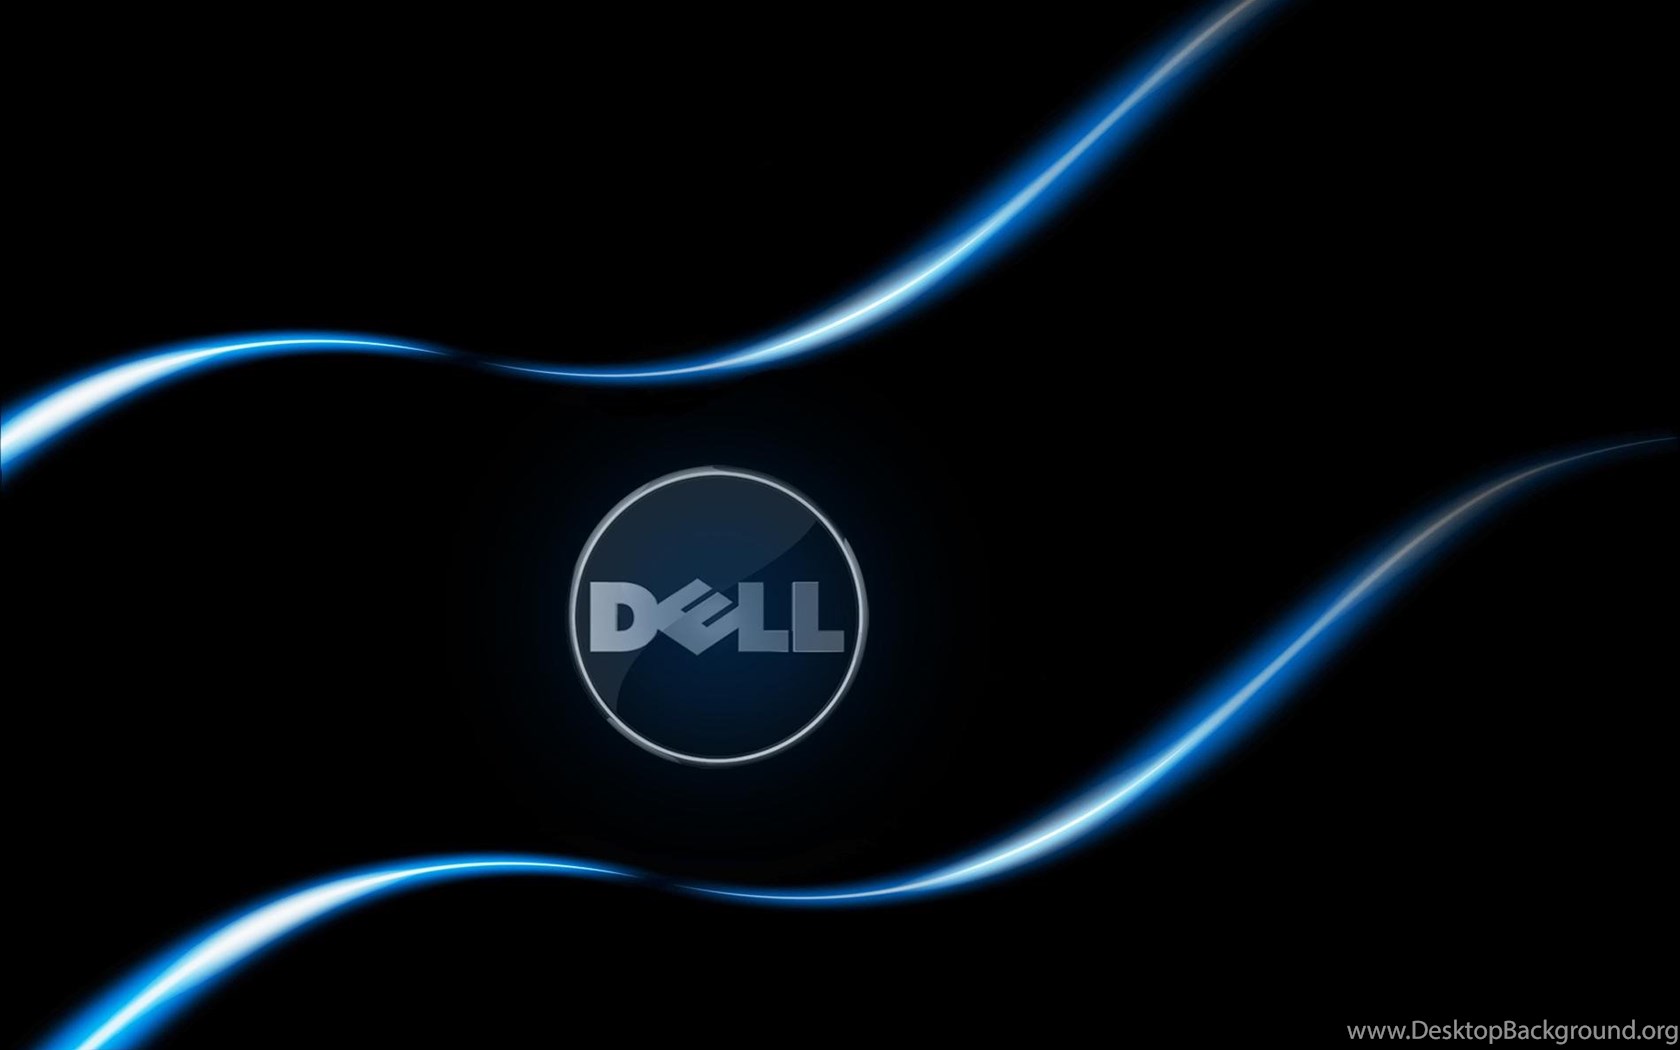 Dell Xps Wallpapers Wallpapers Res Dell Technology Images Dell Desktop Background